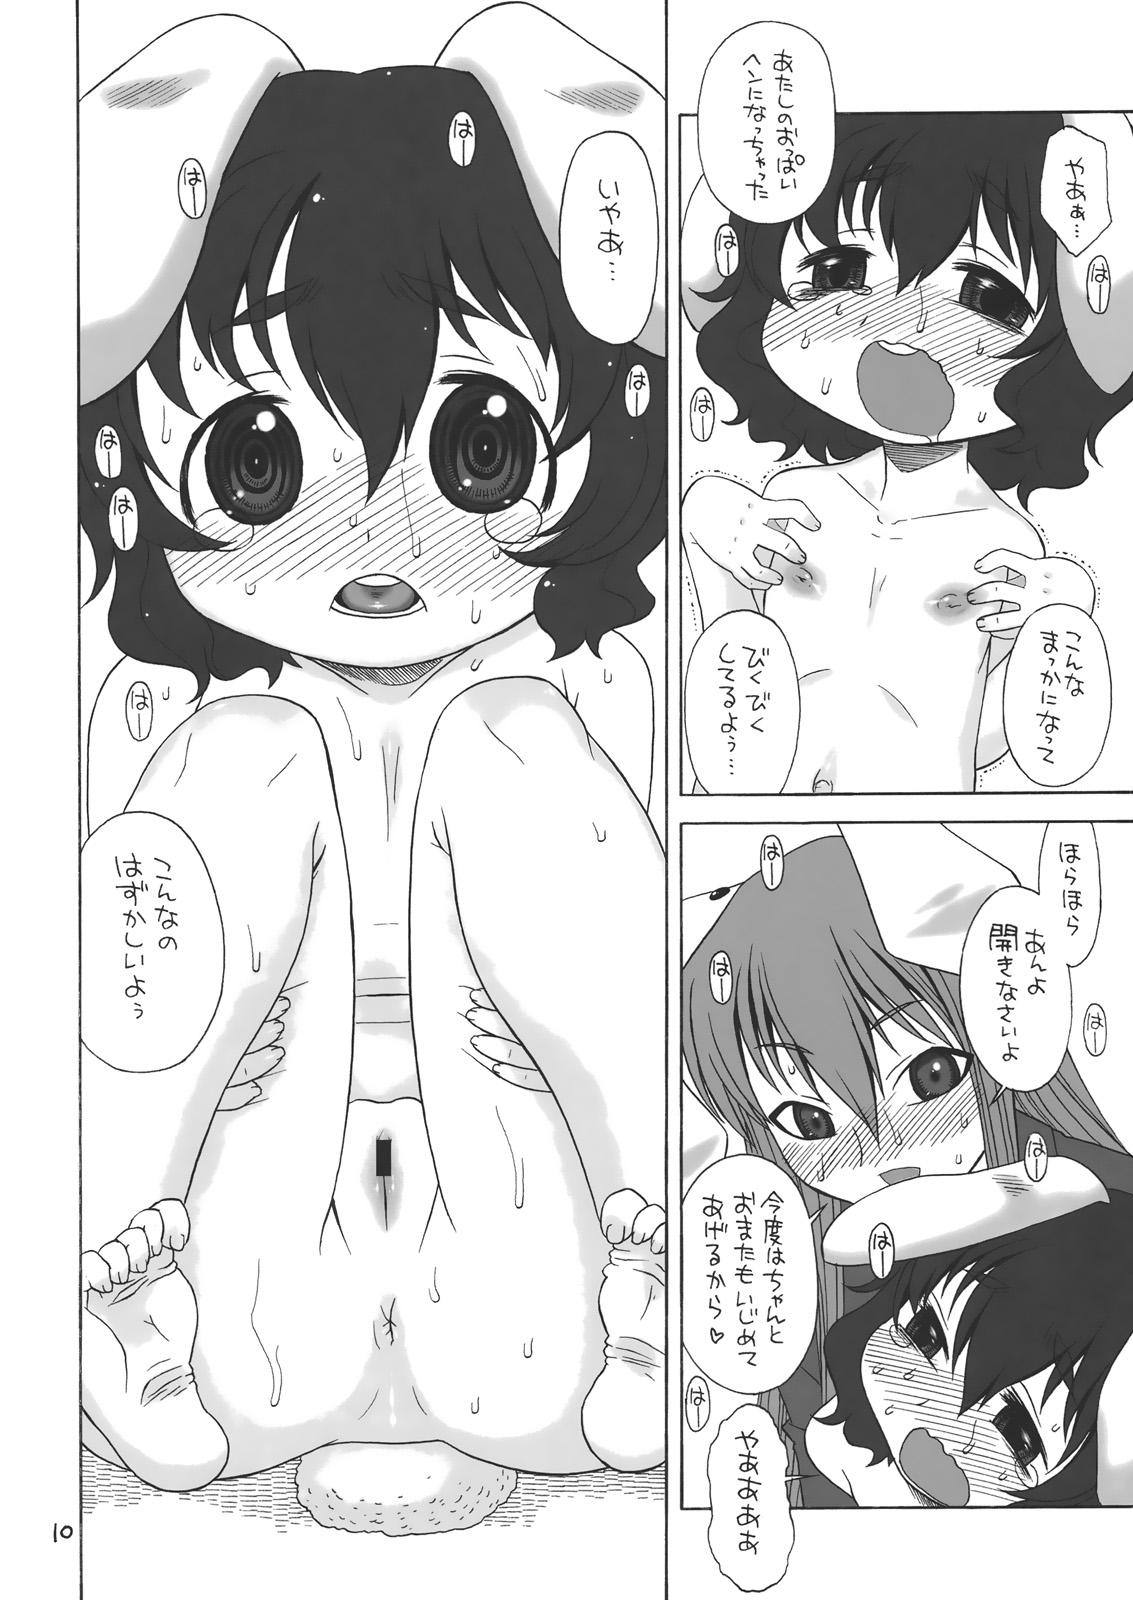 Chacal Itatoma. - Touhou project Cougars - Page 9